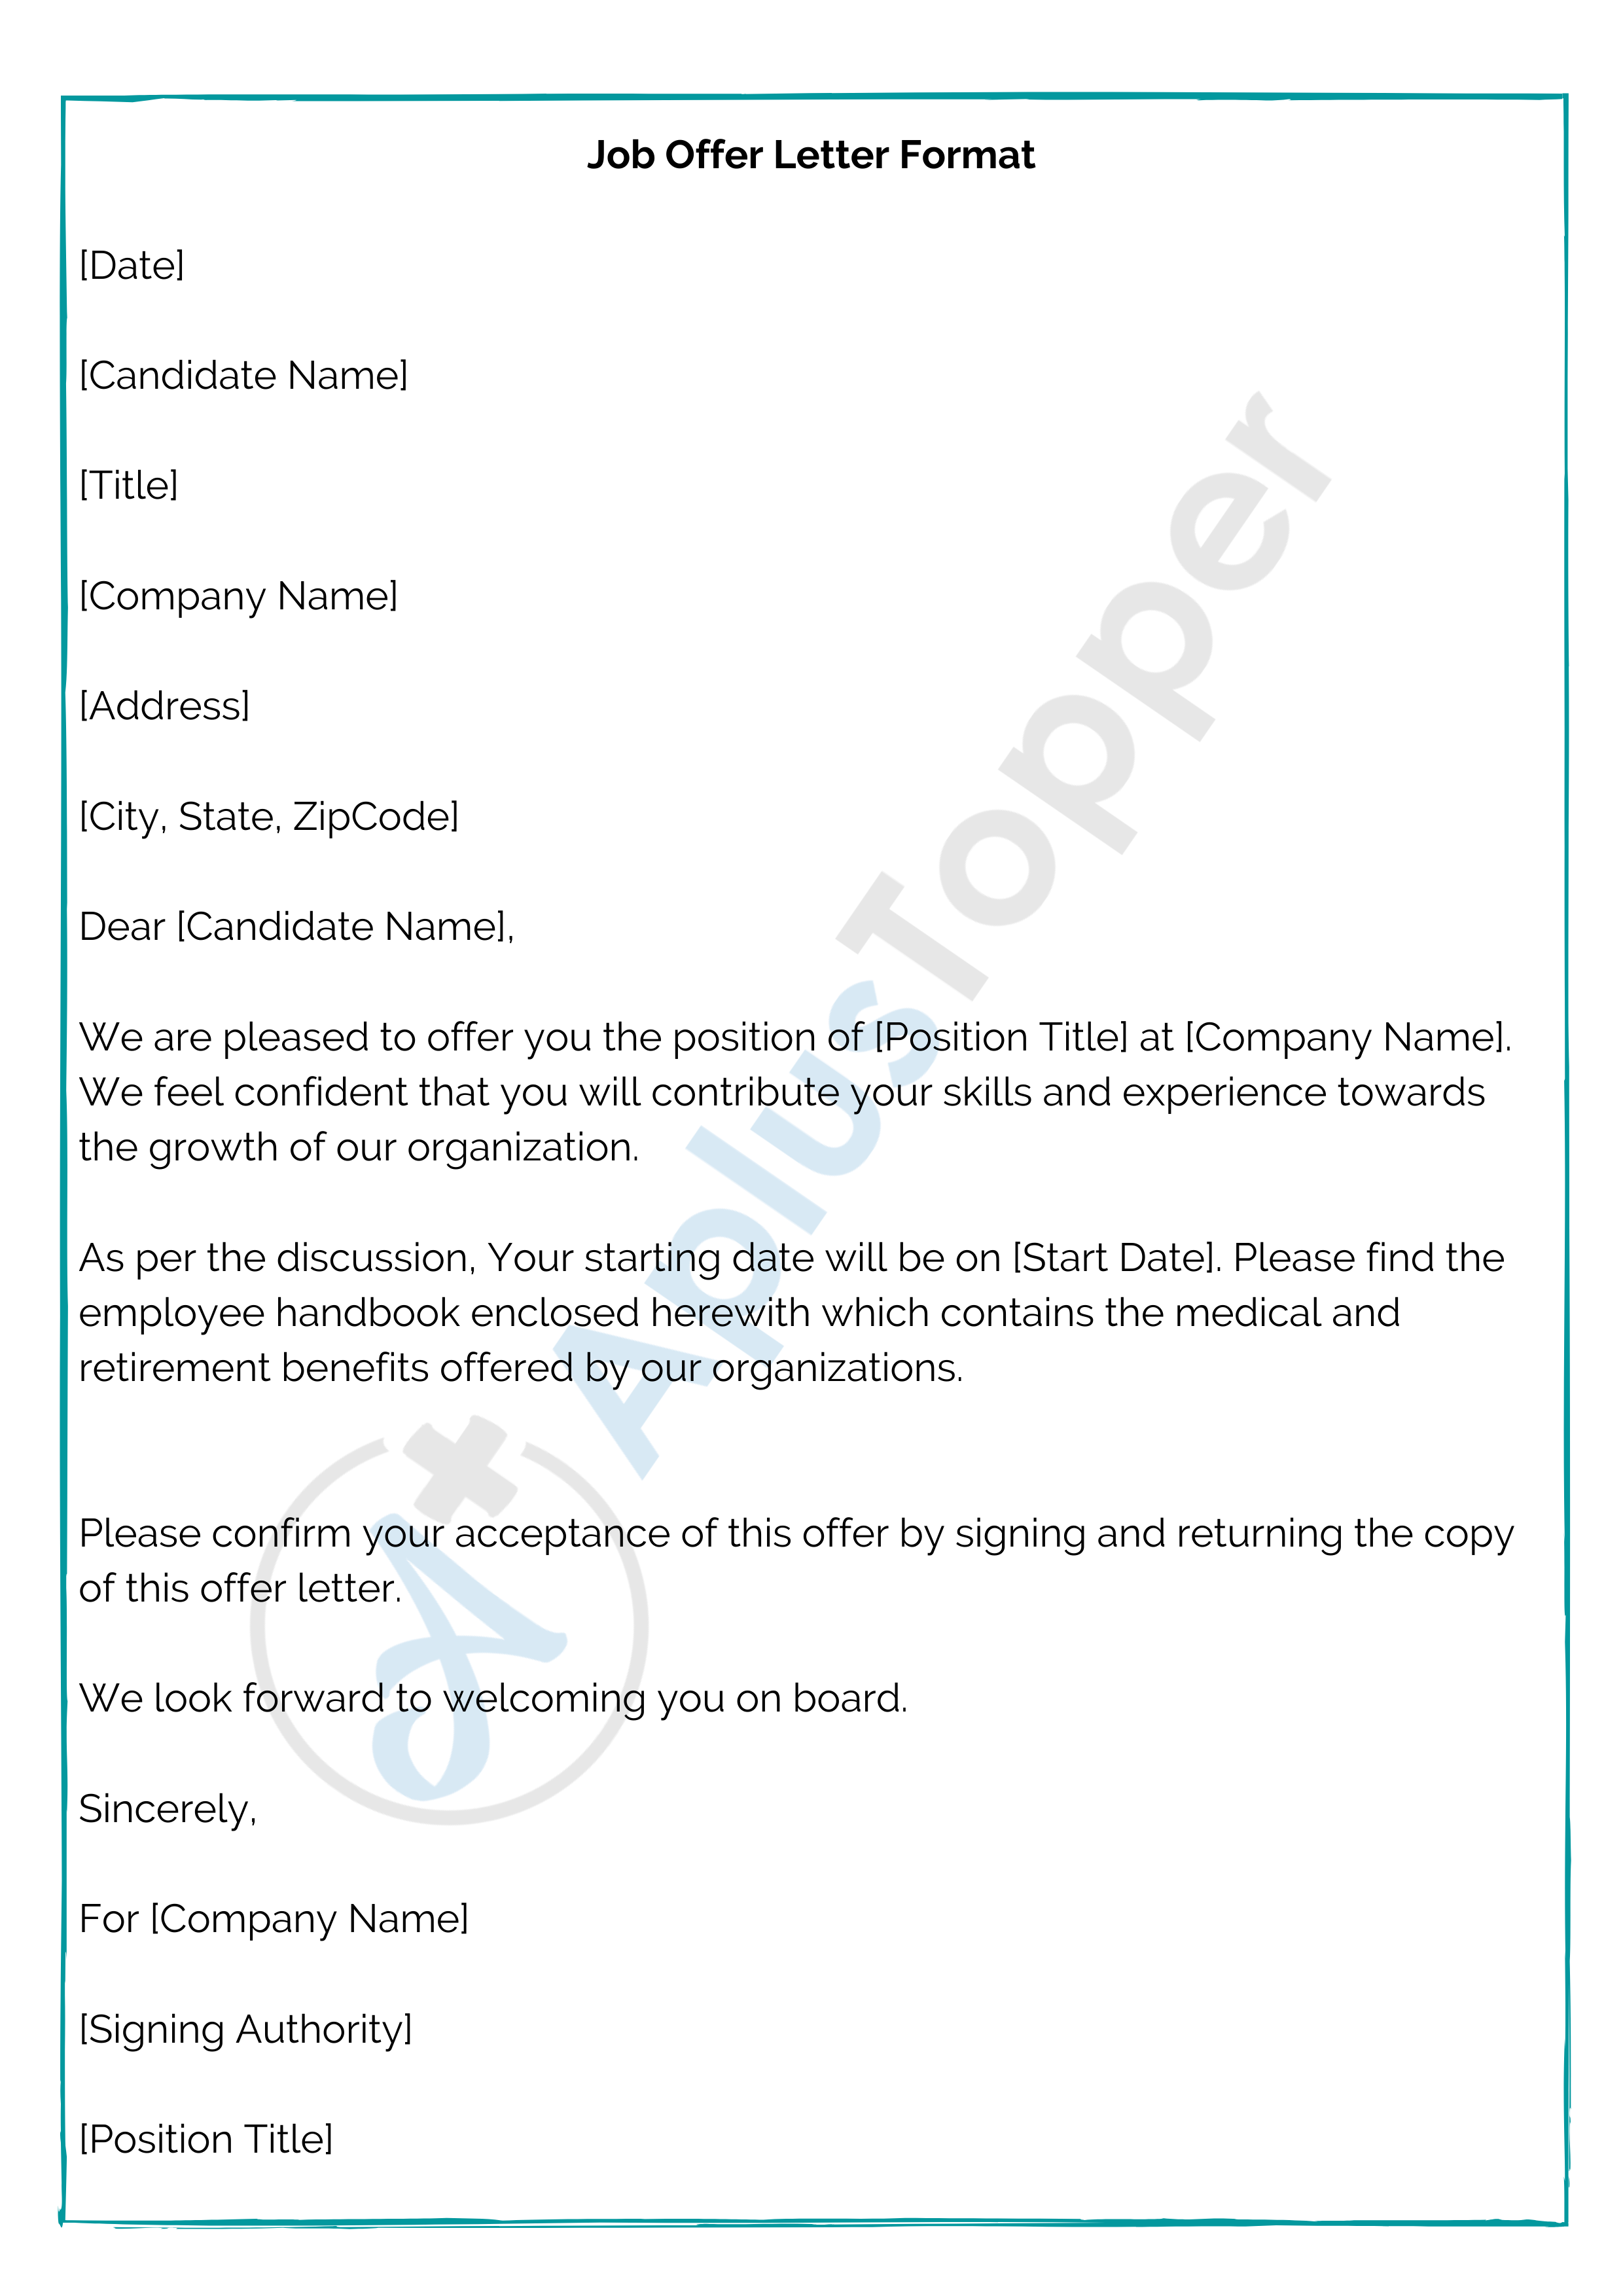 glory-info-about-placement-offer-letter-sample-general-manager-cv